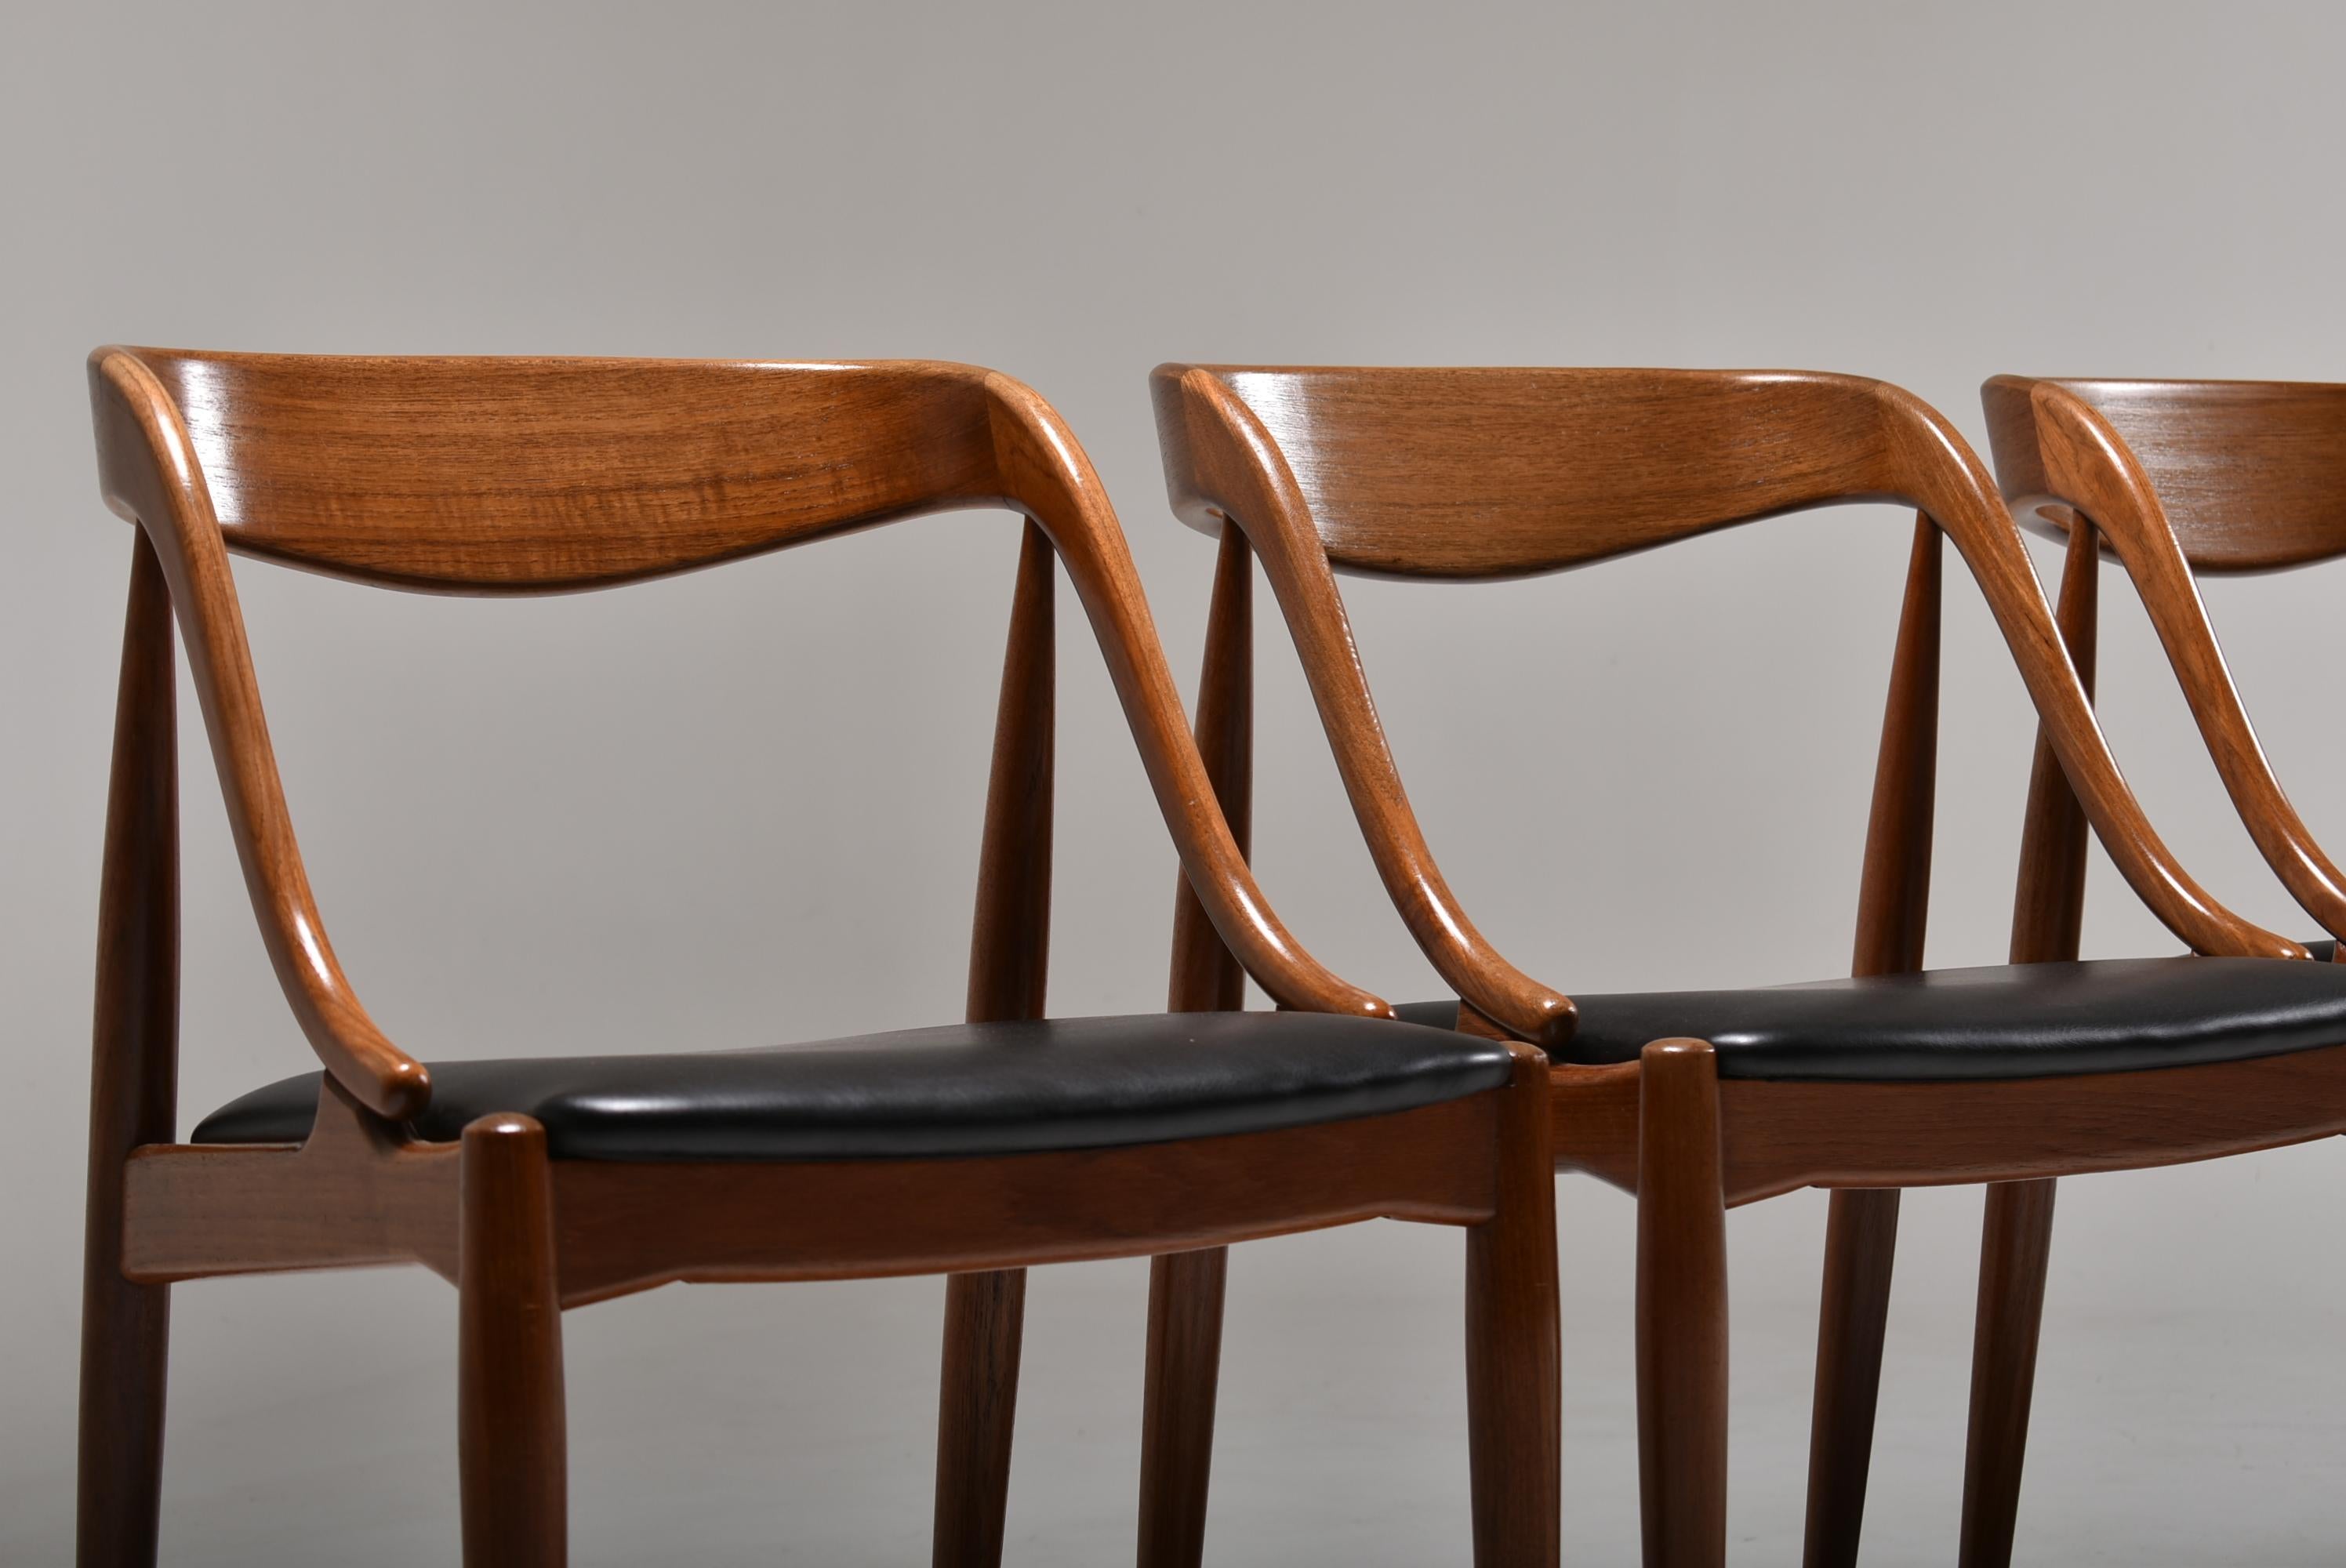 Mid-20th Century Set of Four Teak Dining Chairs by Johannes Andersen for Uldum, Denmark, 1960